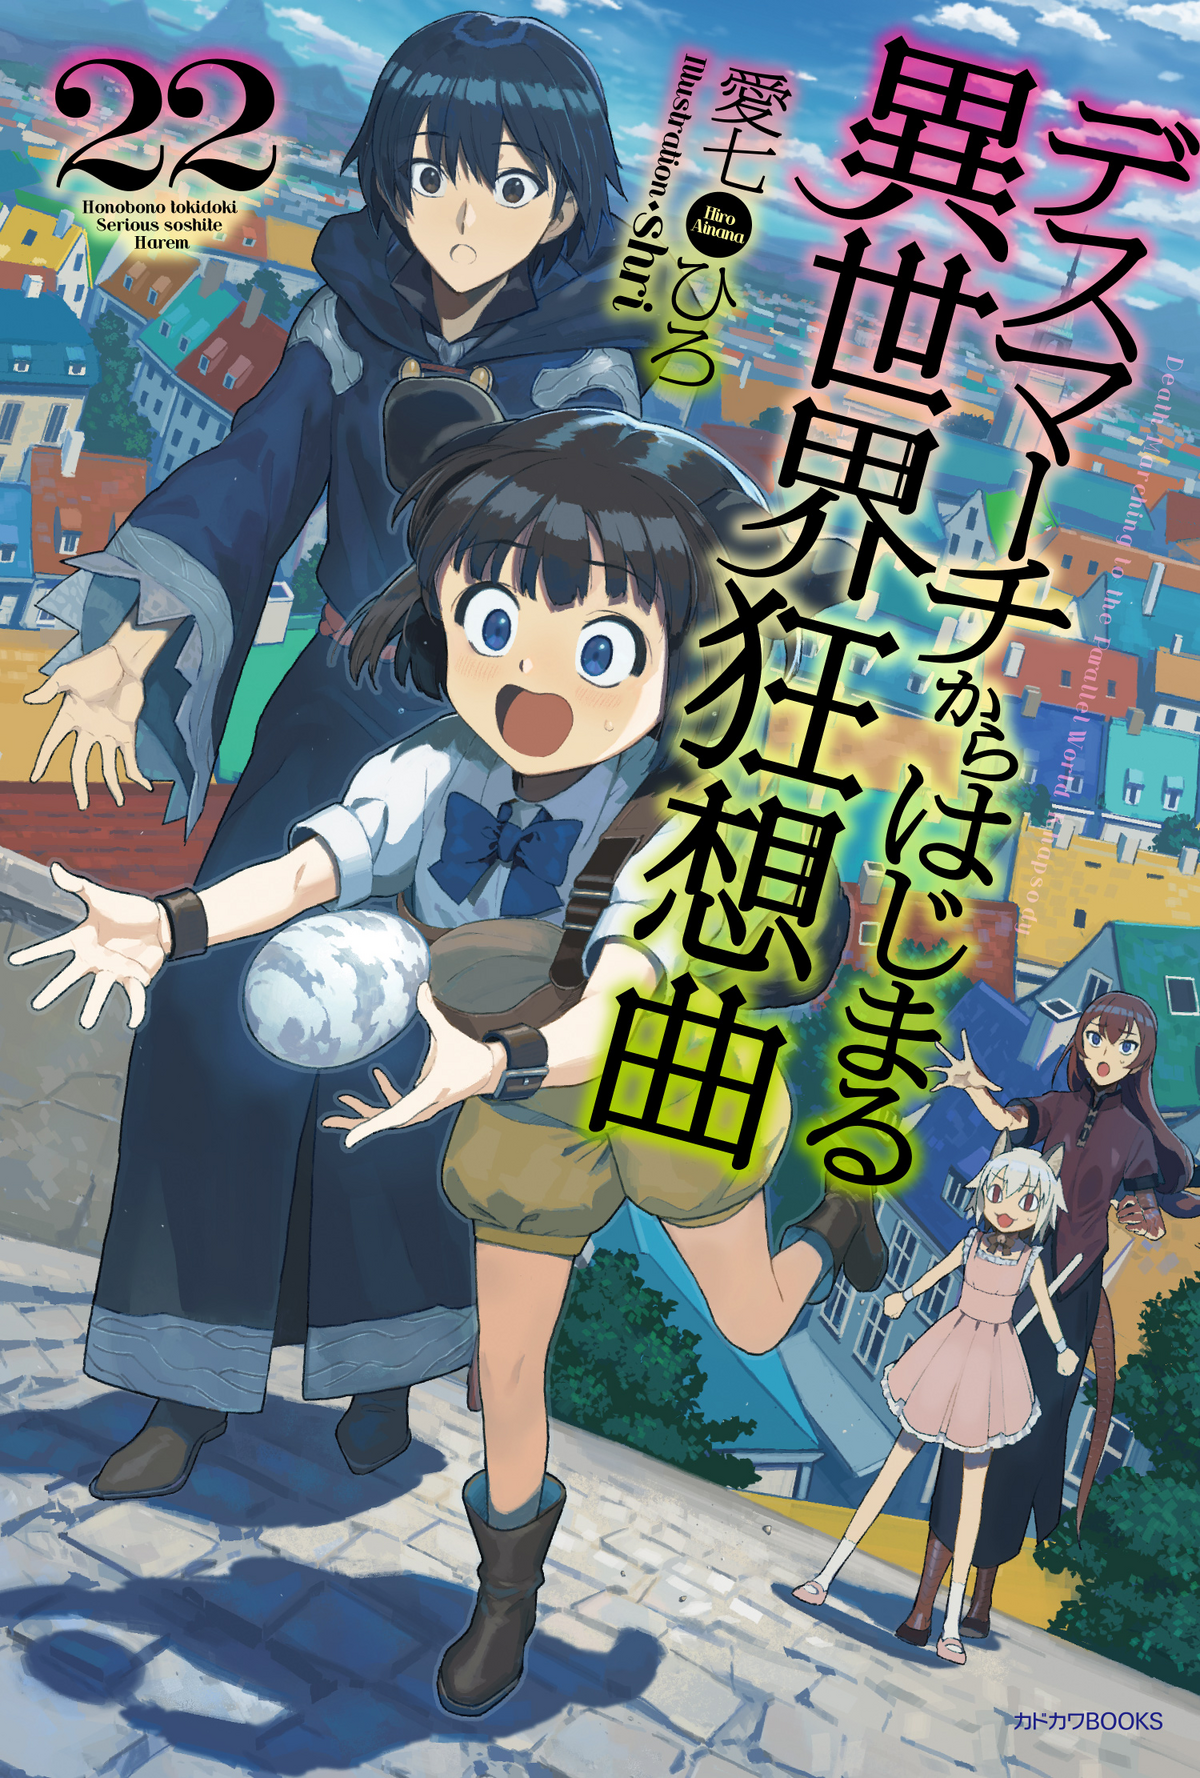 Death March to the Parallel World Rhapsody - VGMdb